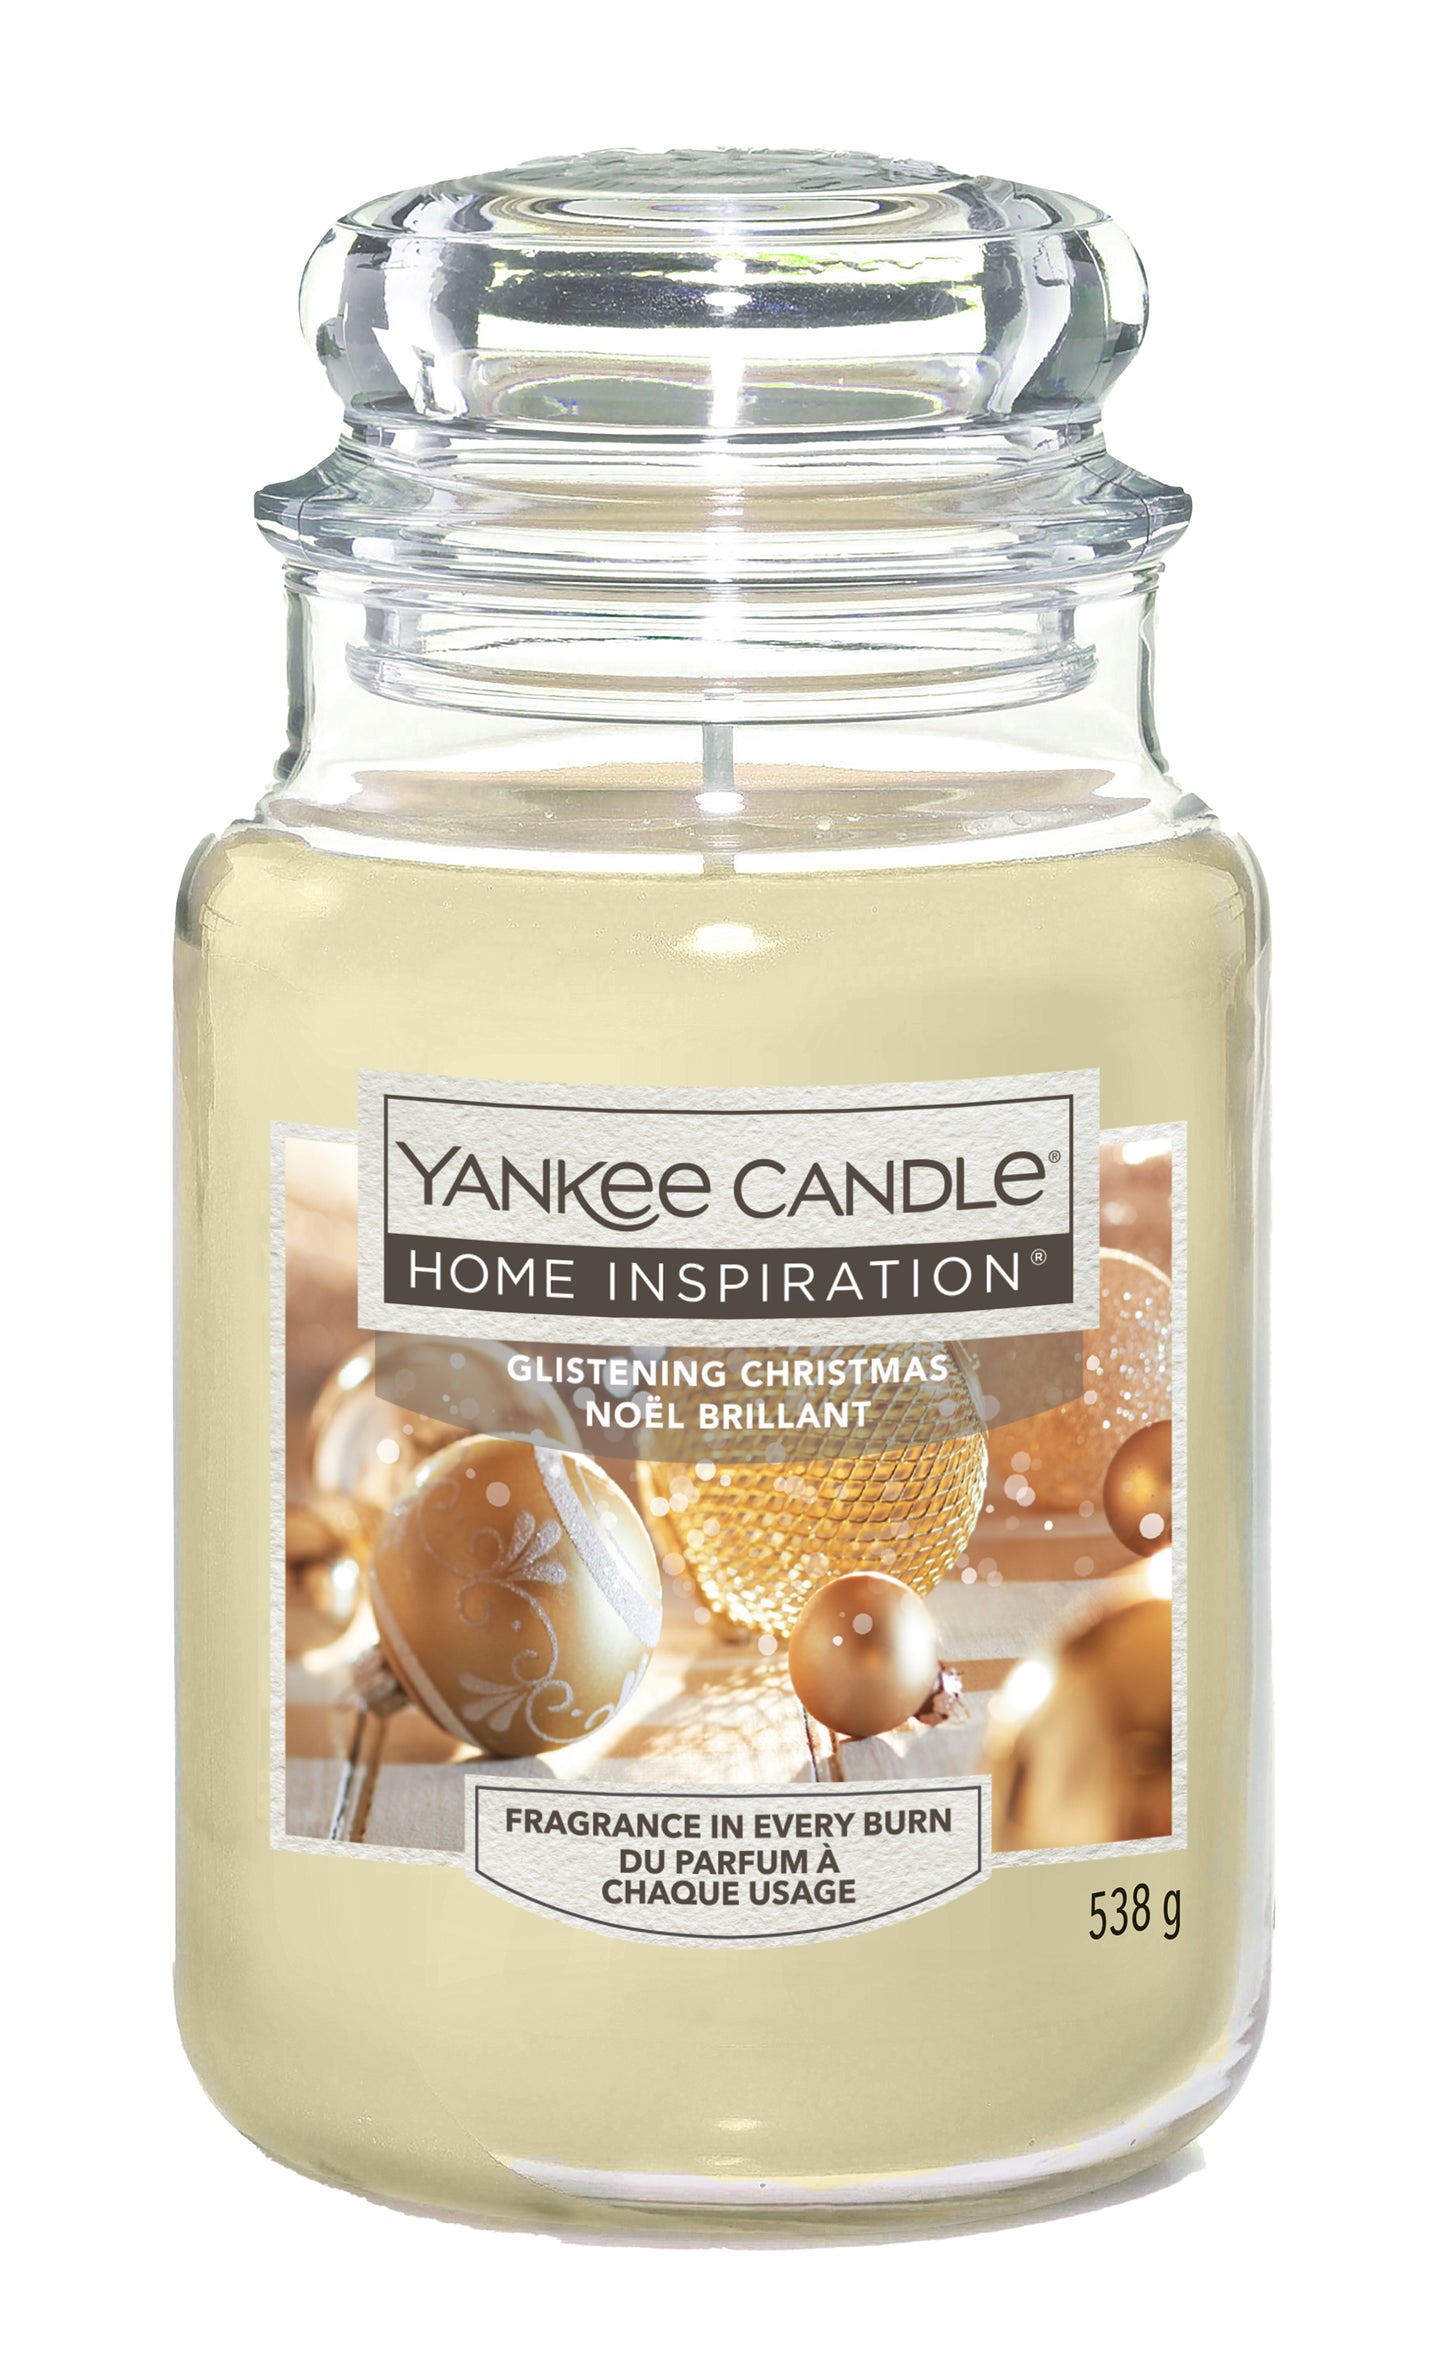 Glistening Christmas Warm up the holidays with a welcoming hug of creamy vanilla and soft amber.